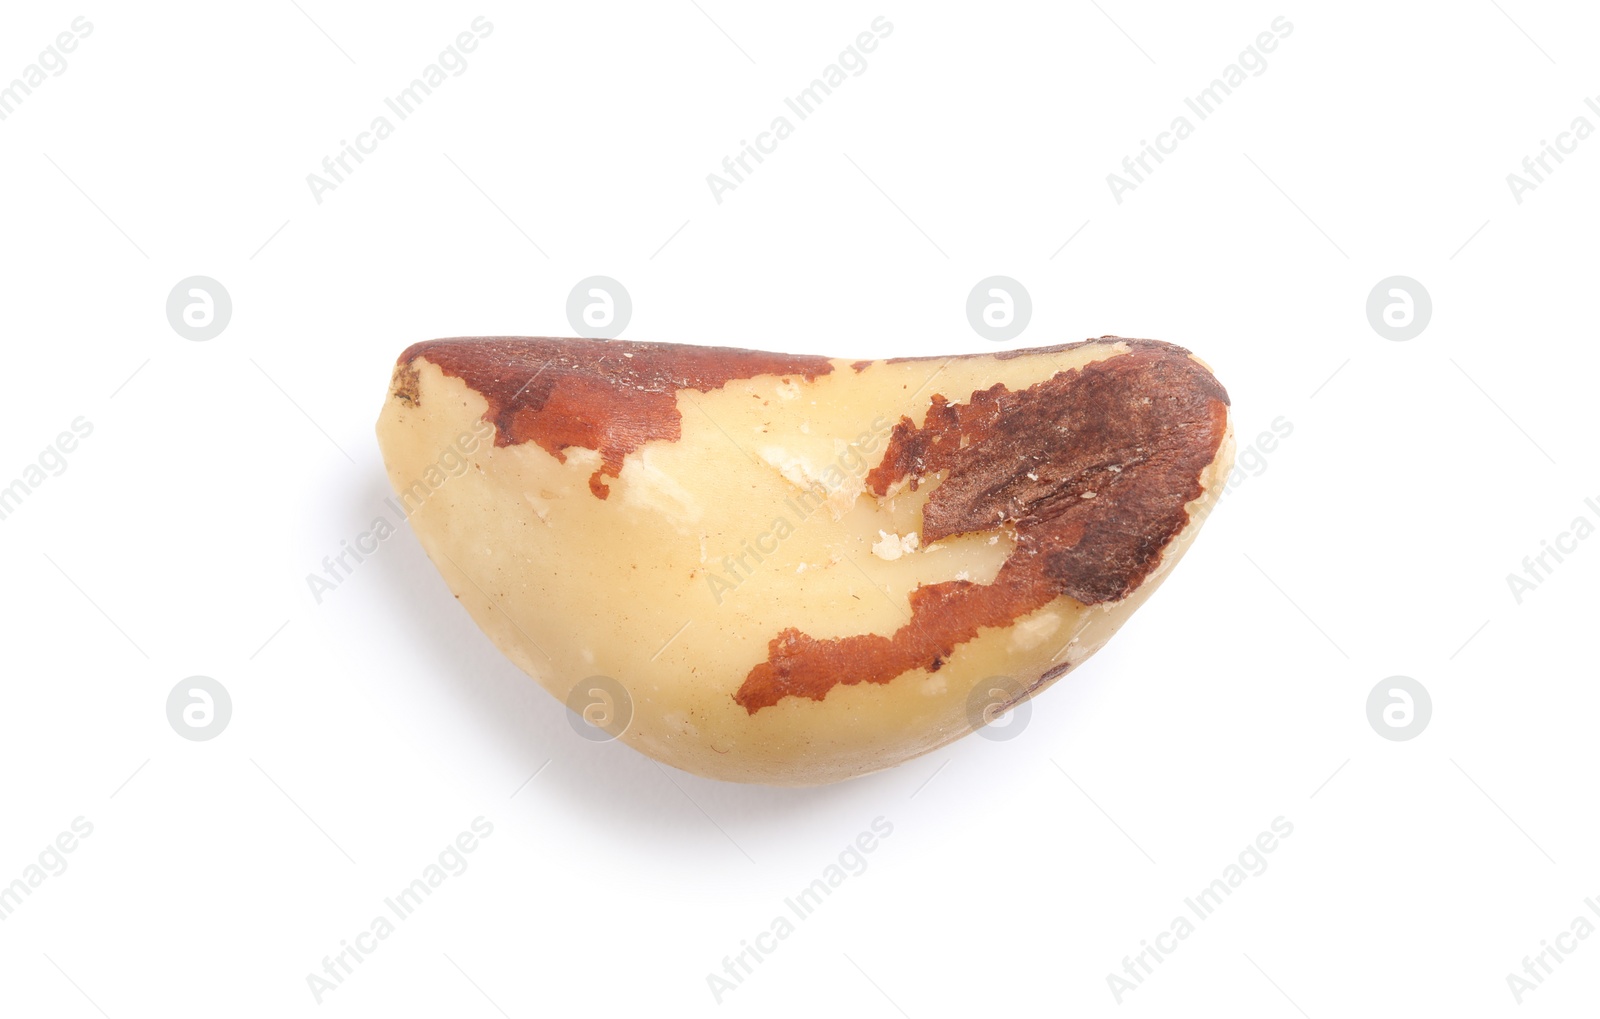 Photo of Delicious Brazil nut on white background. Healthy snack